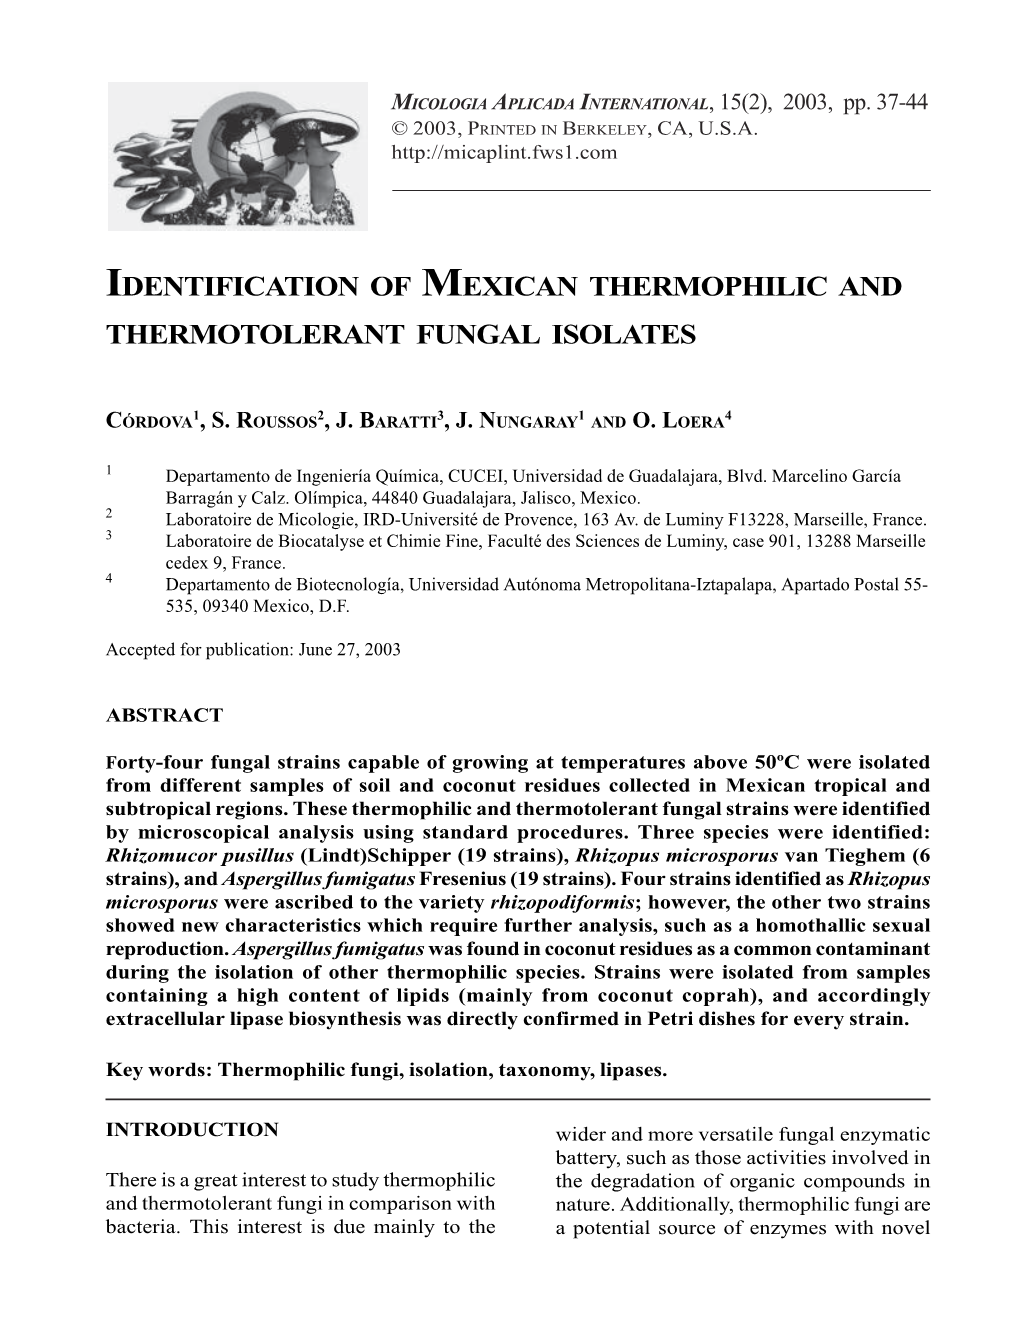 Identification of Mexican Thermophilic and Thermotolerant Fungal Isolates